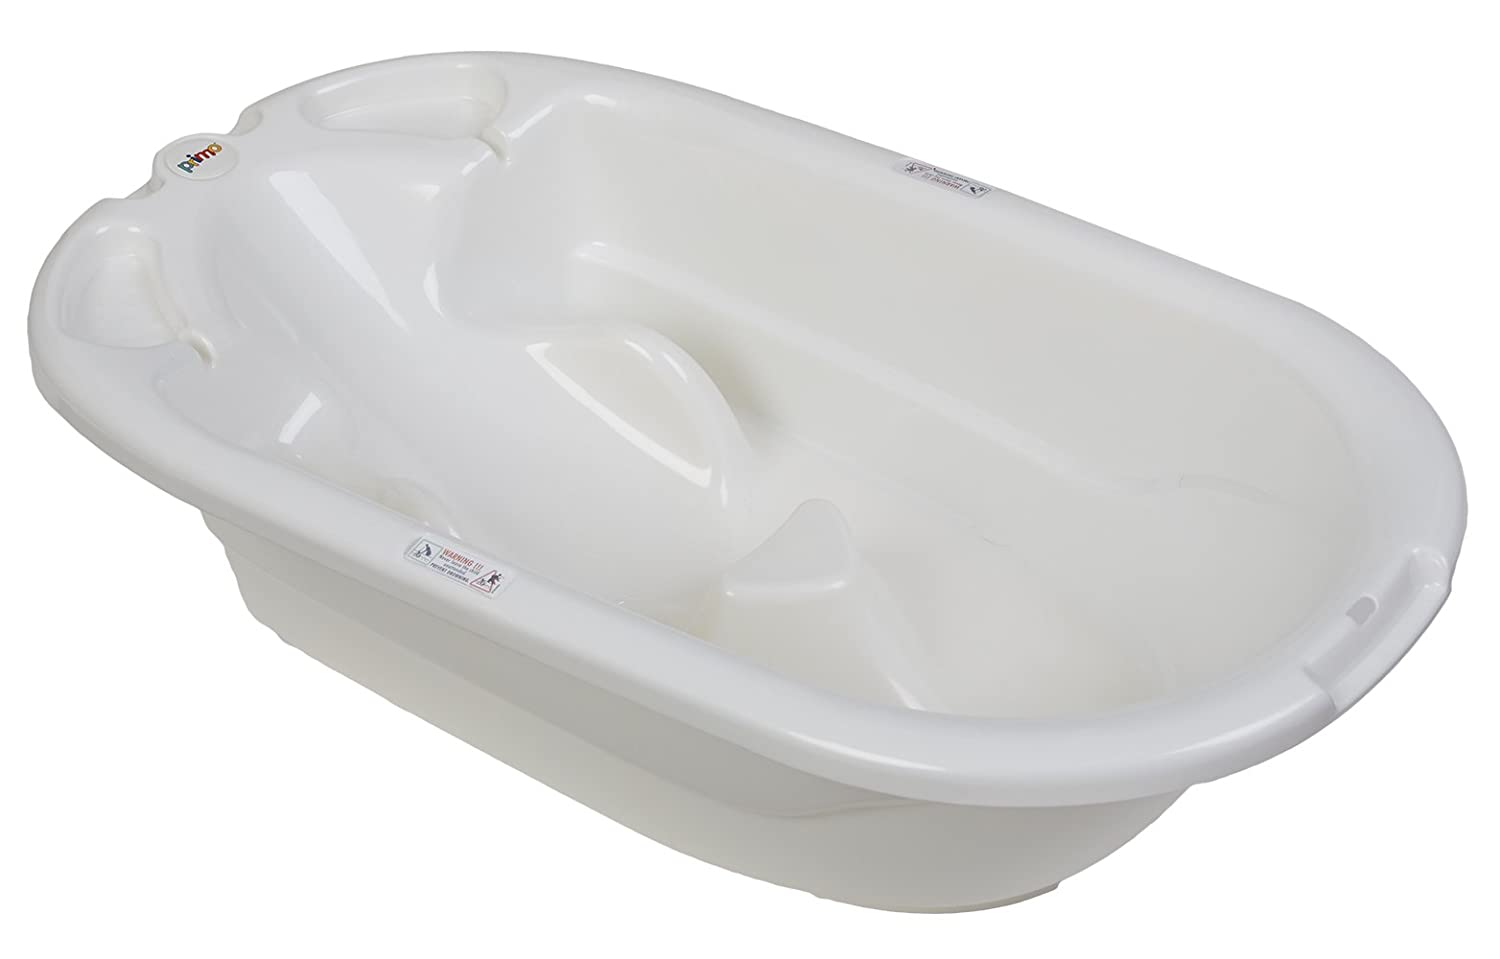 Top 7 Best Infant Tubs For Newborn Reviews in 2023 1